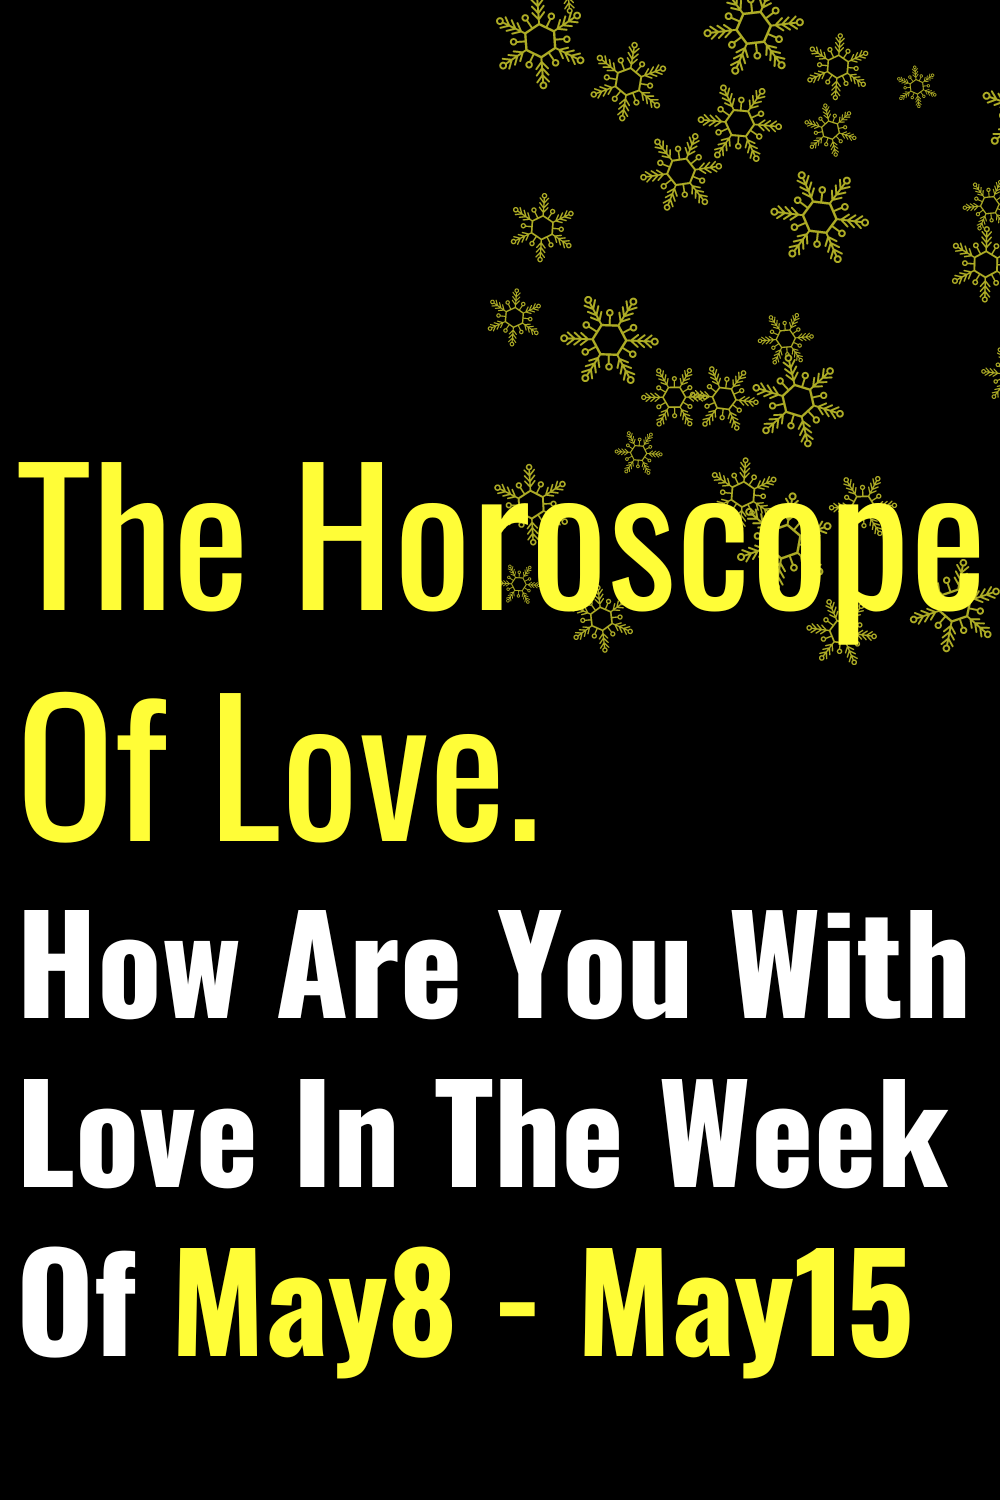 The Horoscope Of Love. How Are You With Love In The Week Of May8 - May15